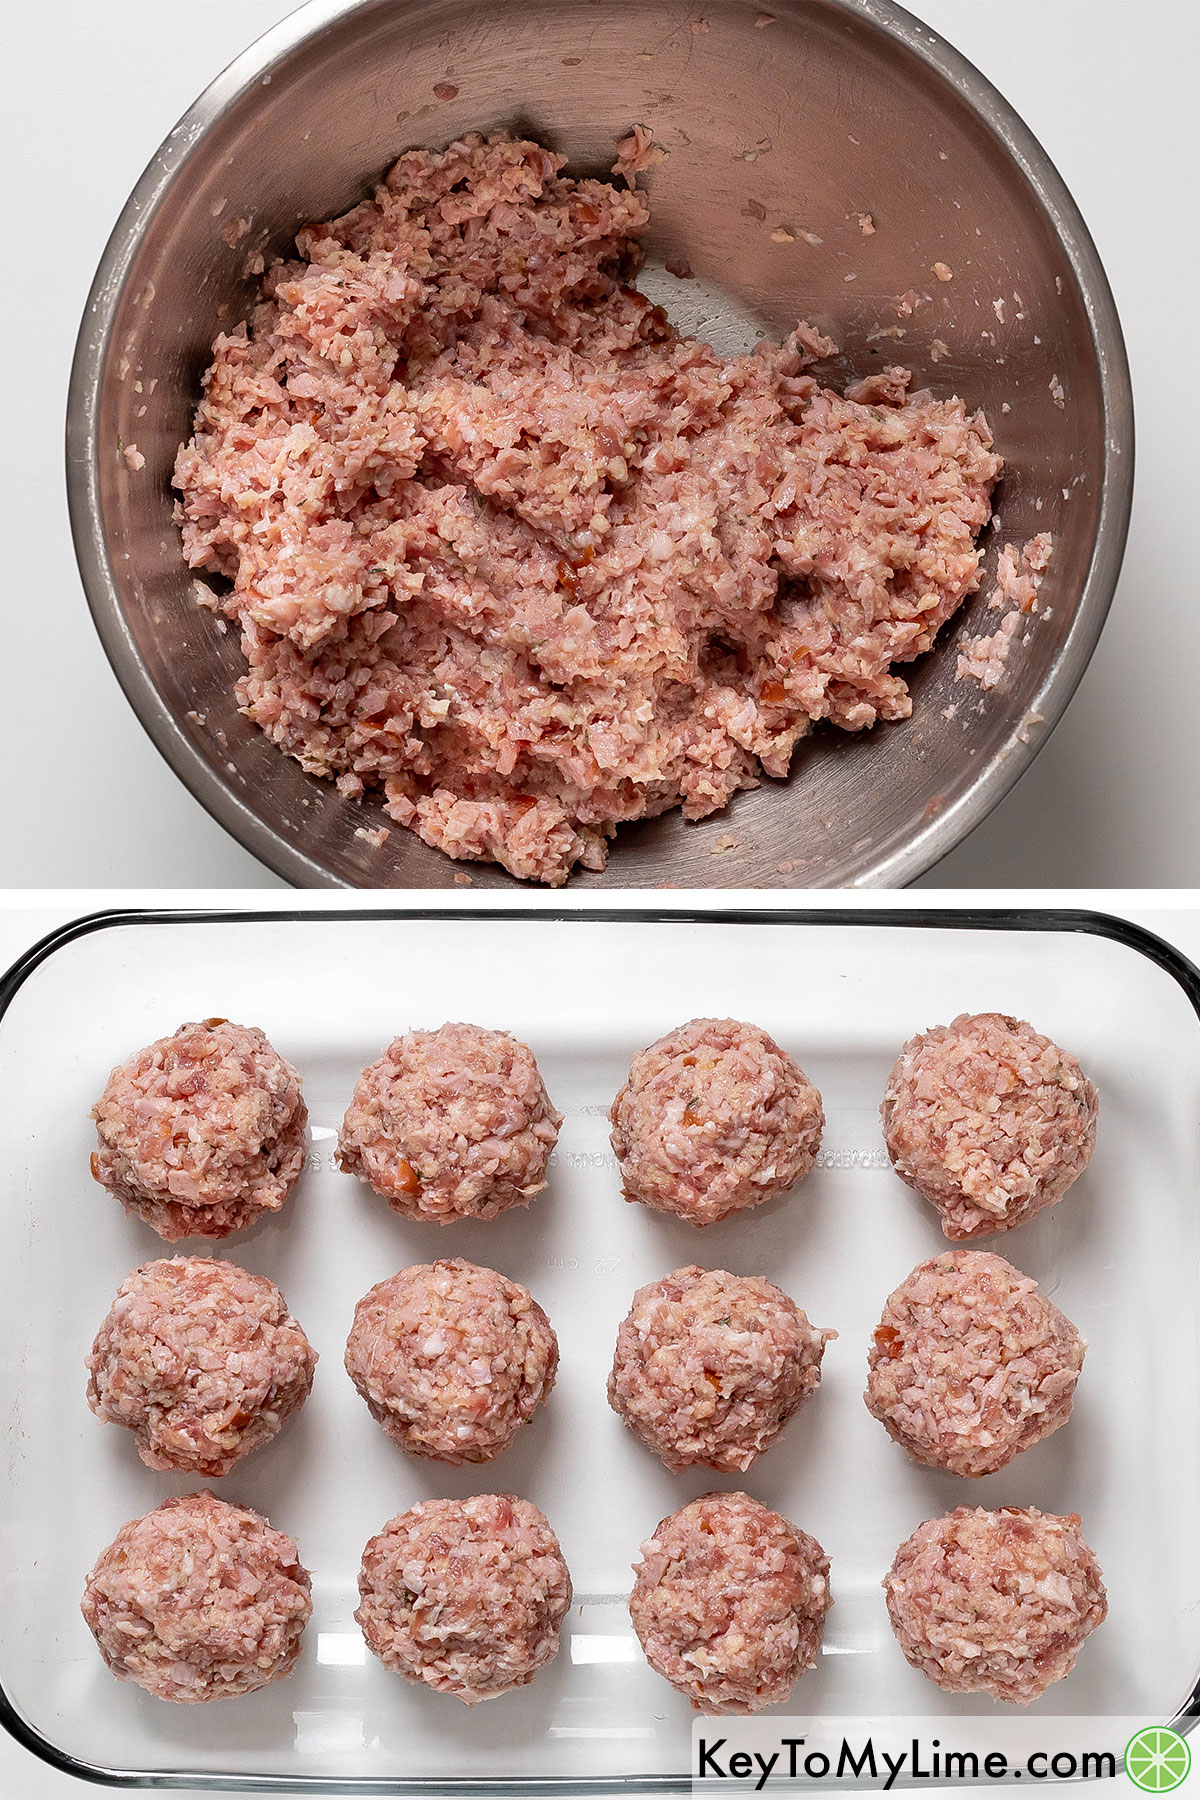 Thoroughly mixing the ham ingredients together in a large mixing bowl, and then placing the uniform balls in a casserole dish.